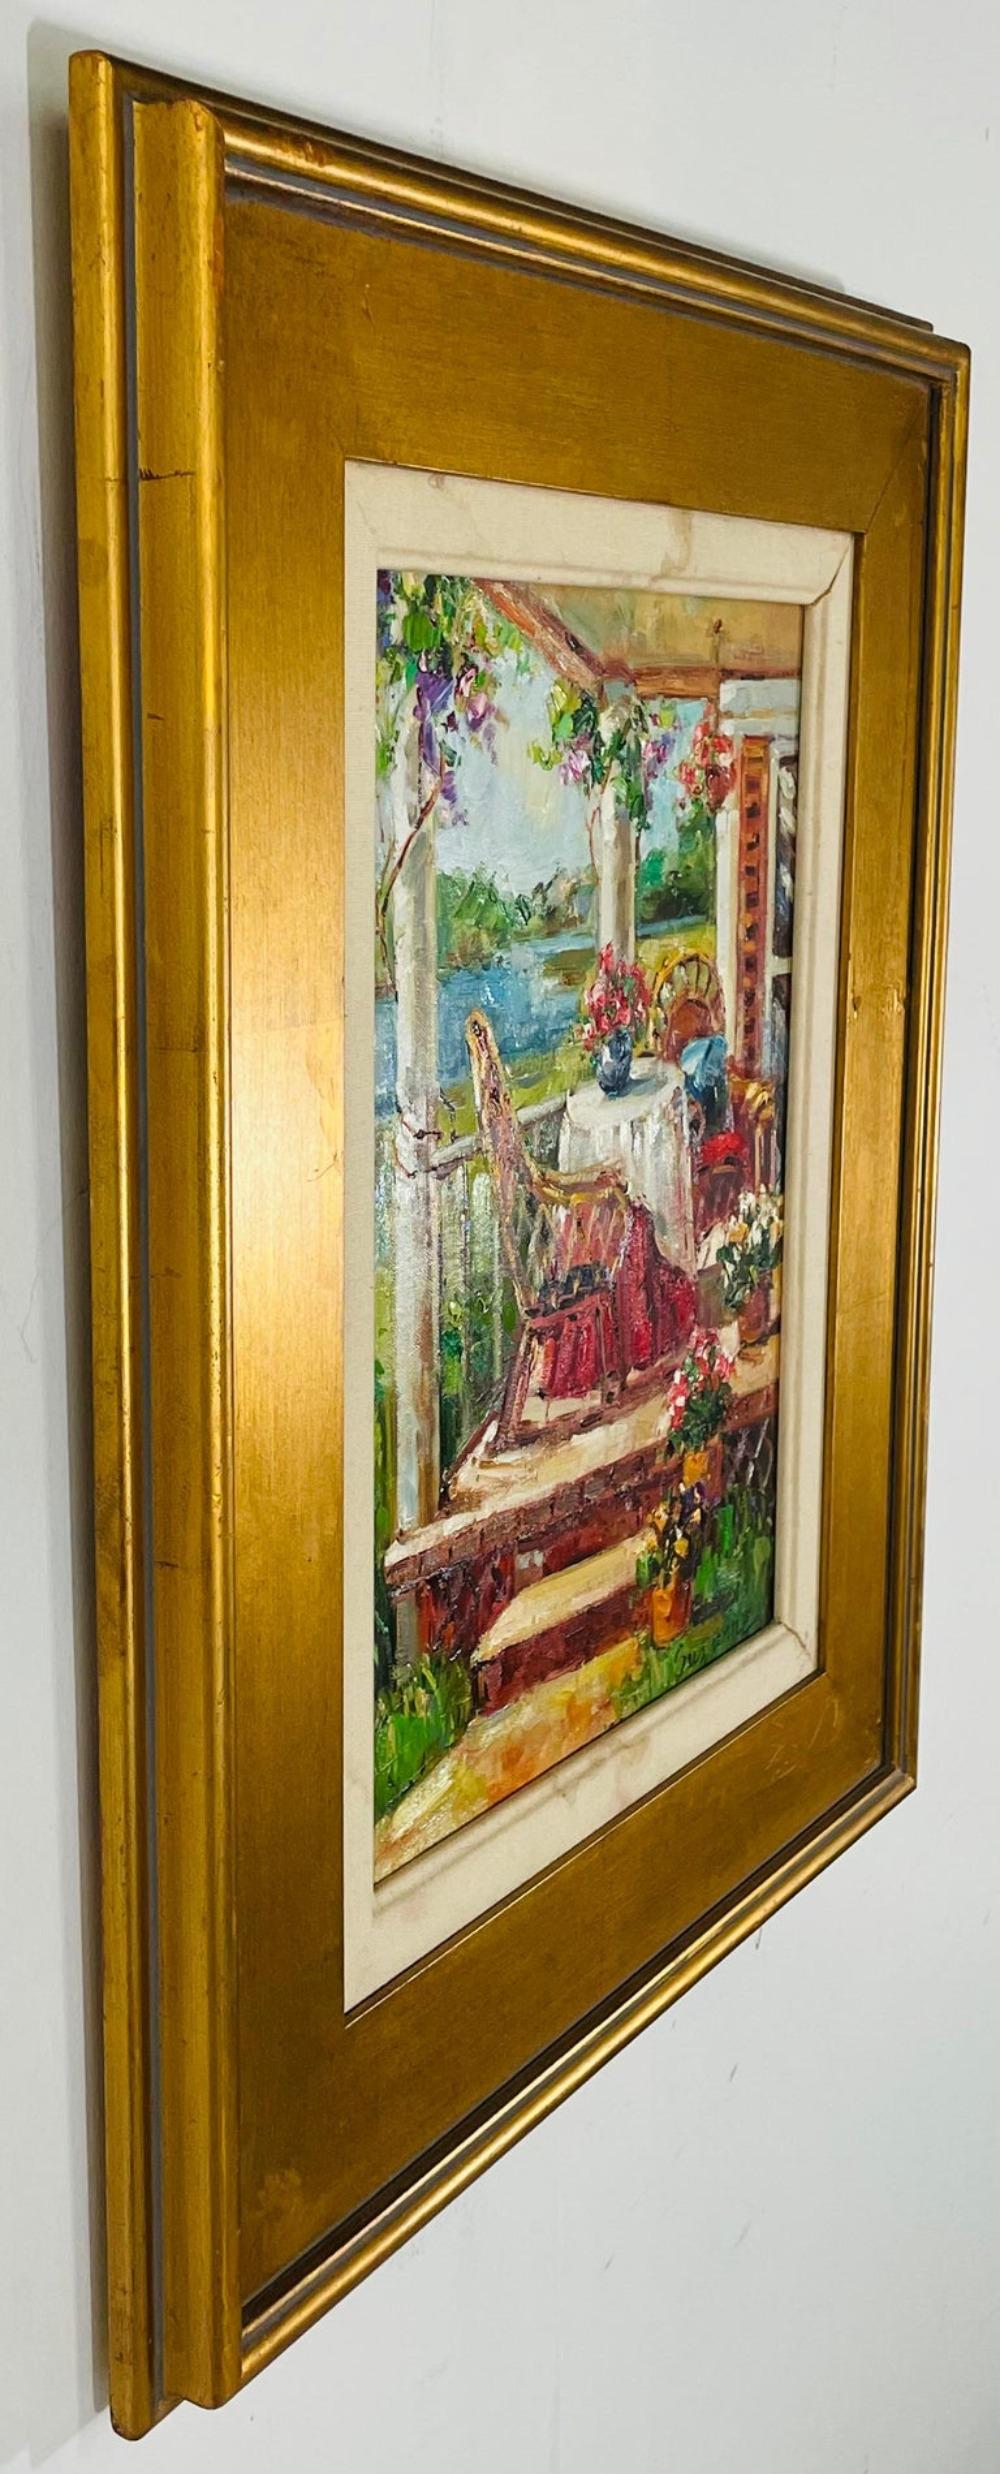 Vintage Oil on Canvas Painting of a Home Porch Signed by Artist in Gilt Frame - Brown Landscape Painting by Unknown